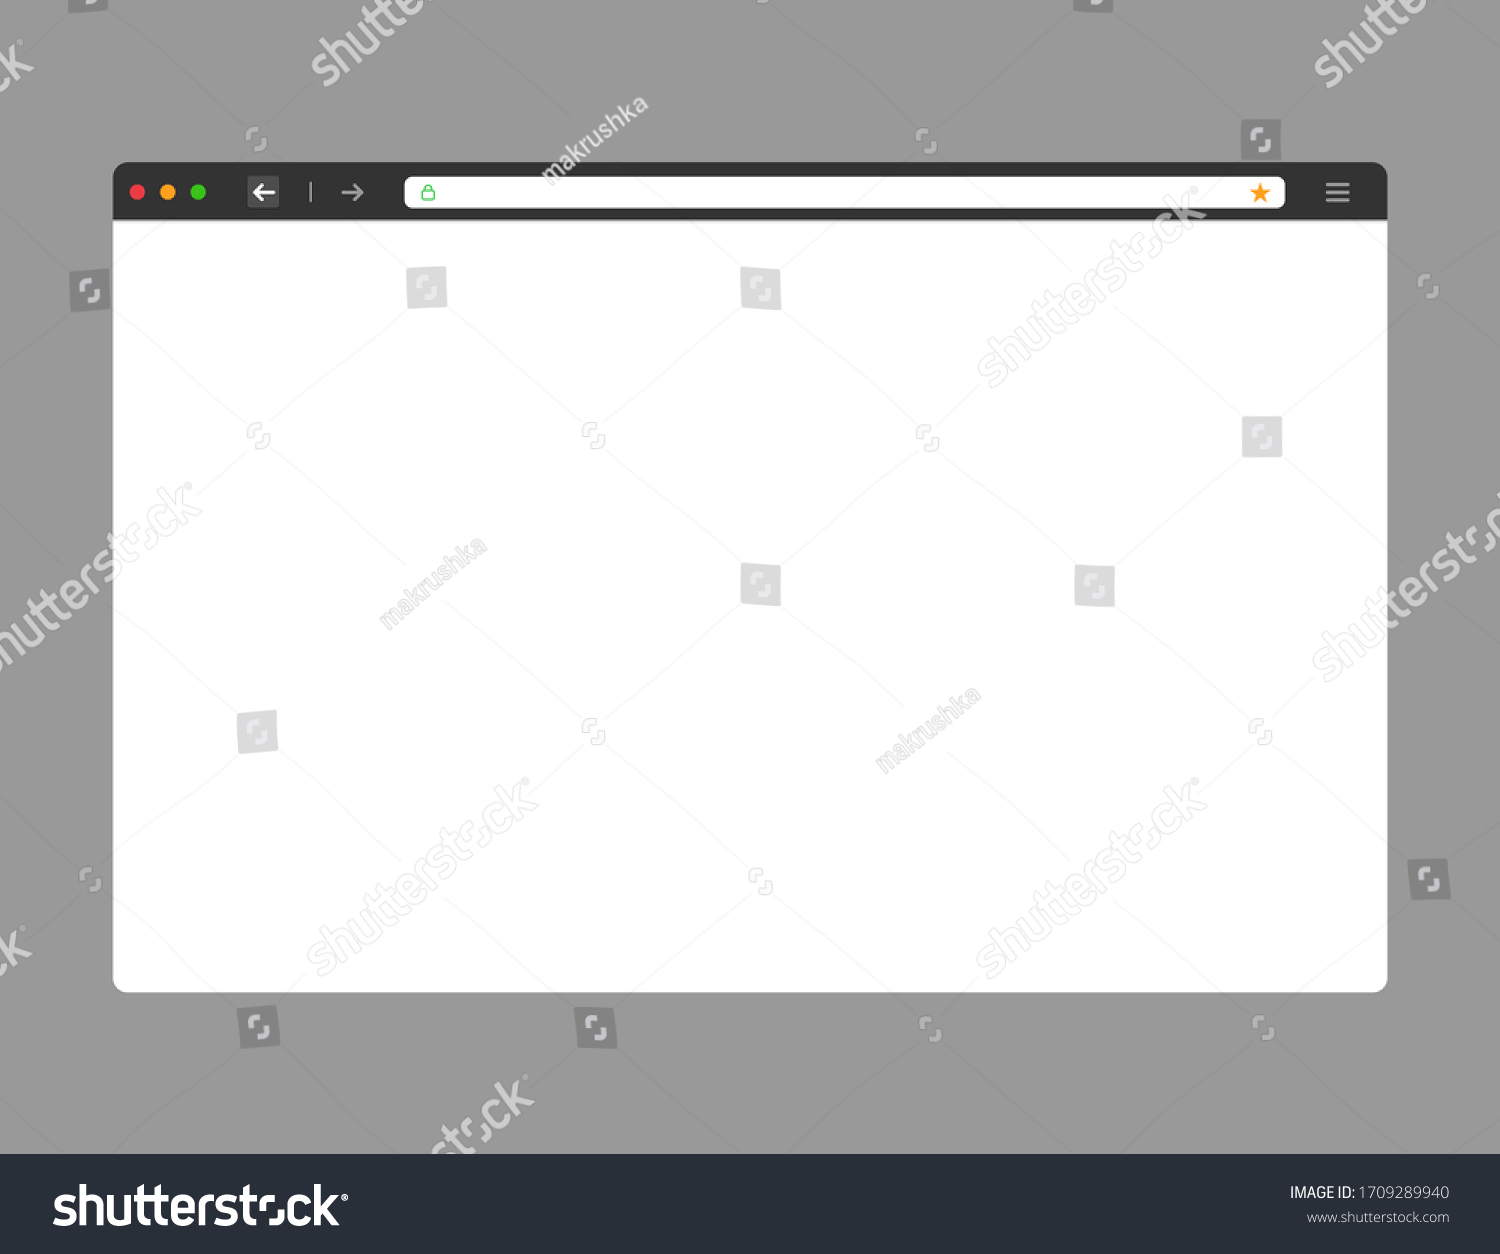 Web browser mockup in dark modern flat design. Website page of computer with green lock and favorites icon. Isolated internet template of browser. Vector EPS 10. #1709289940